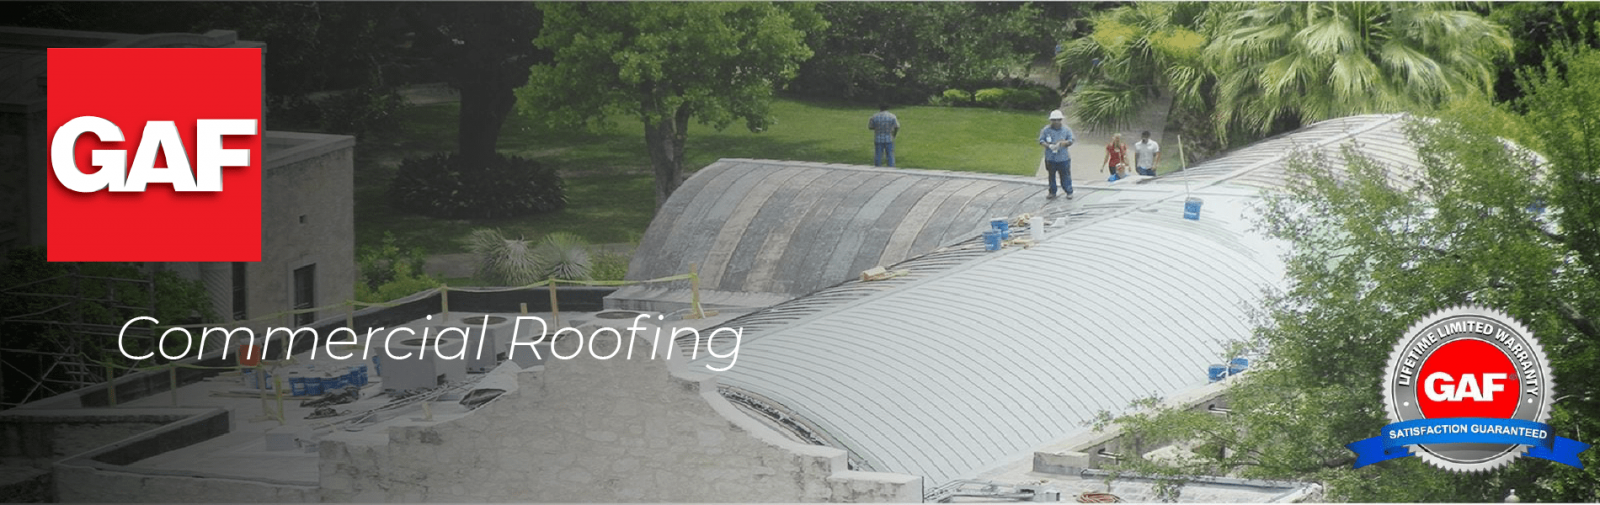 Mabe's Roofing, Inc Images